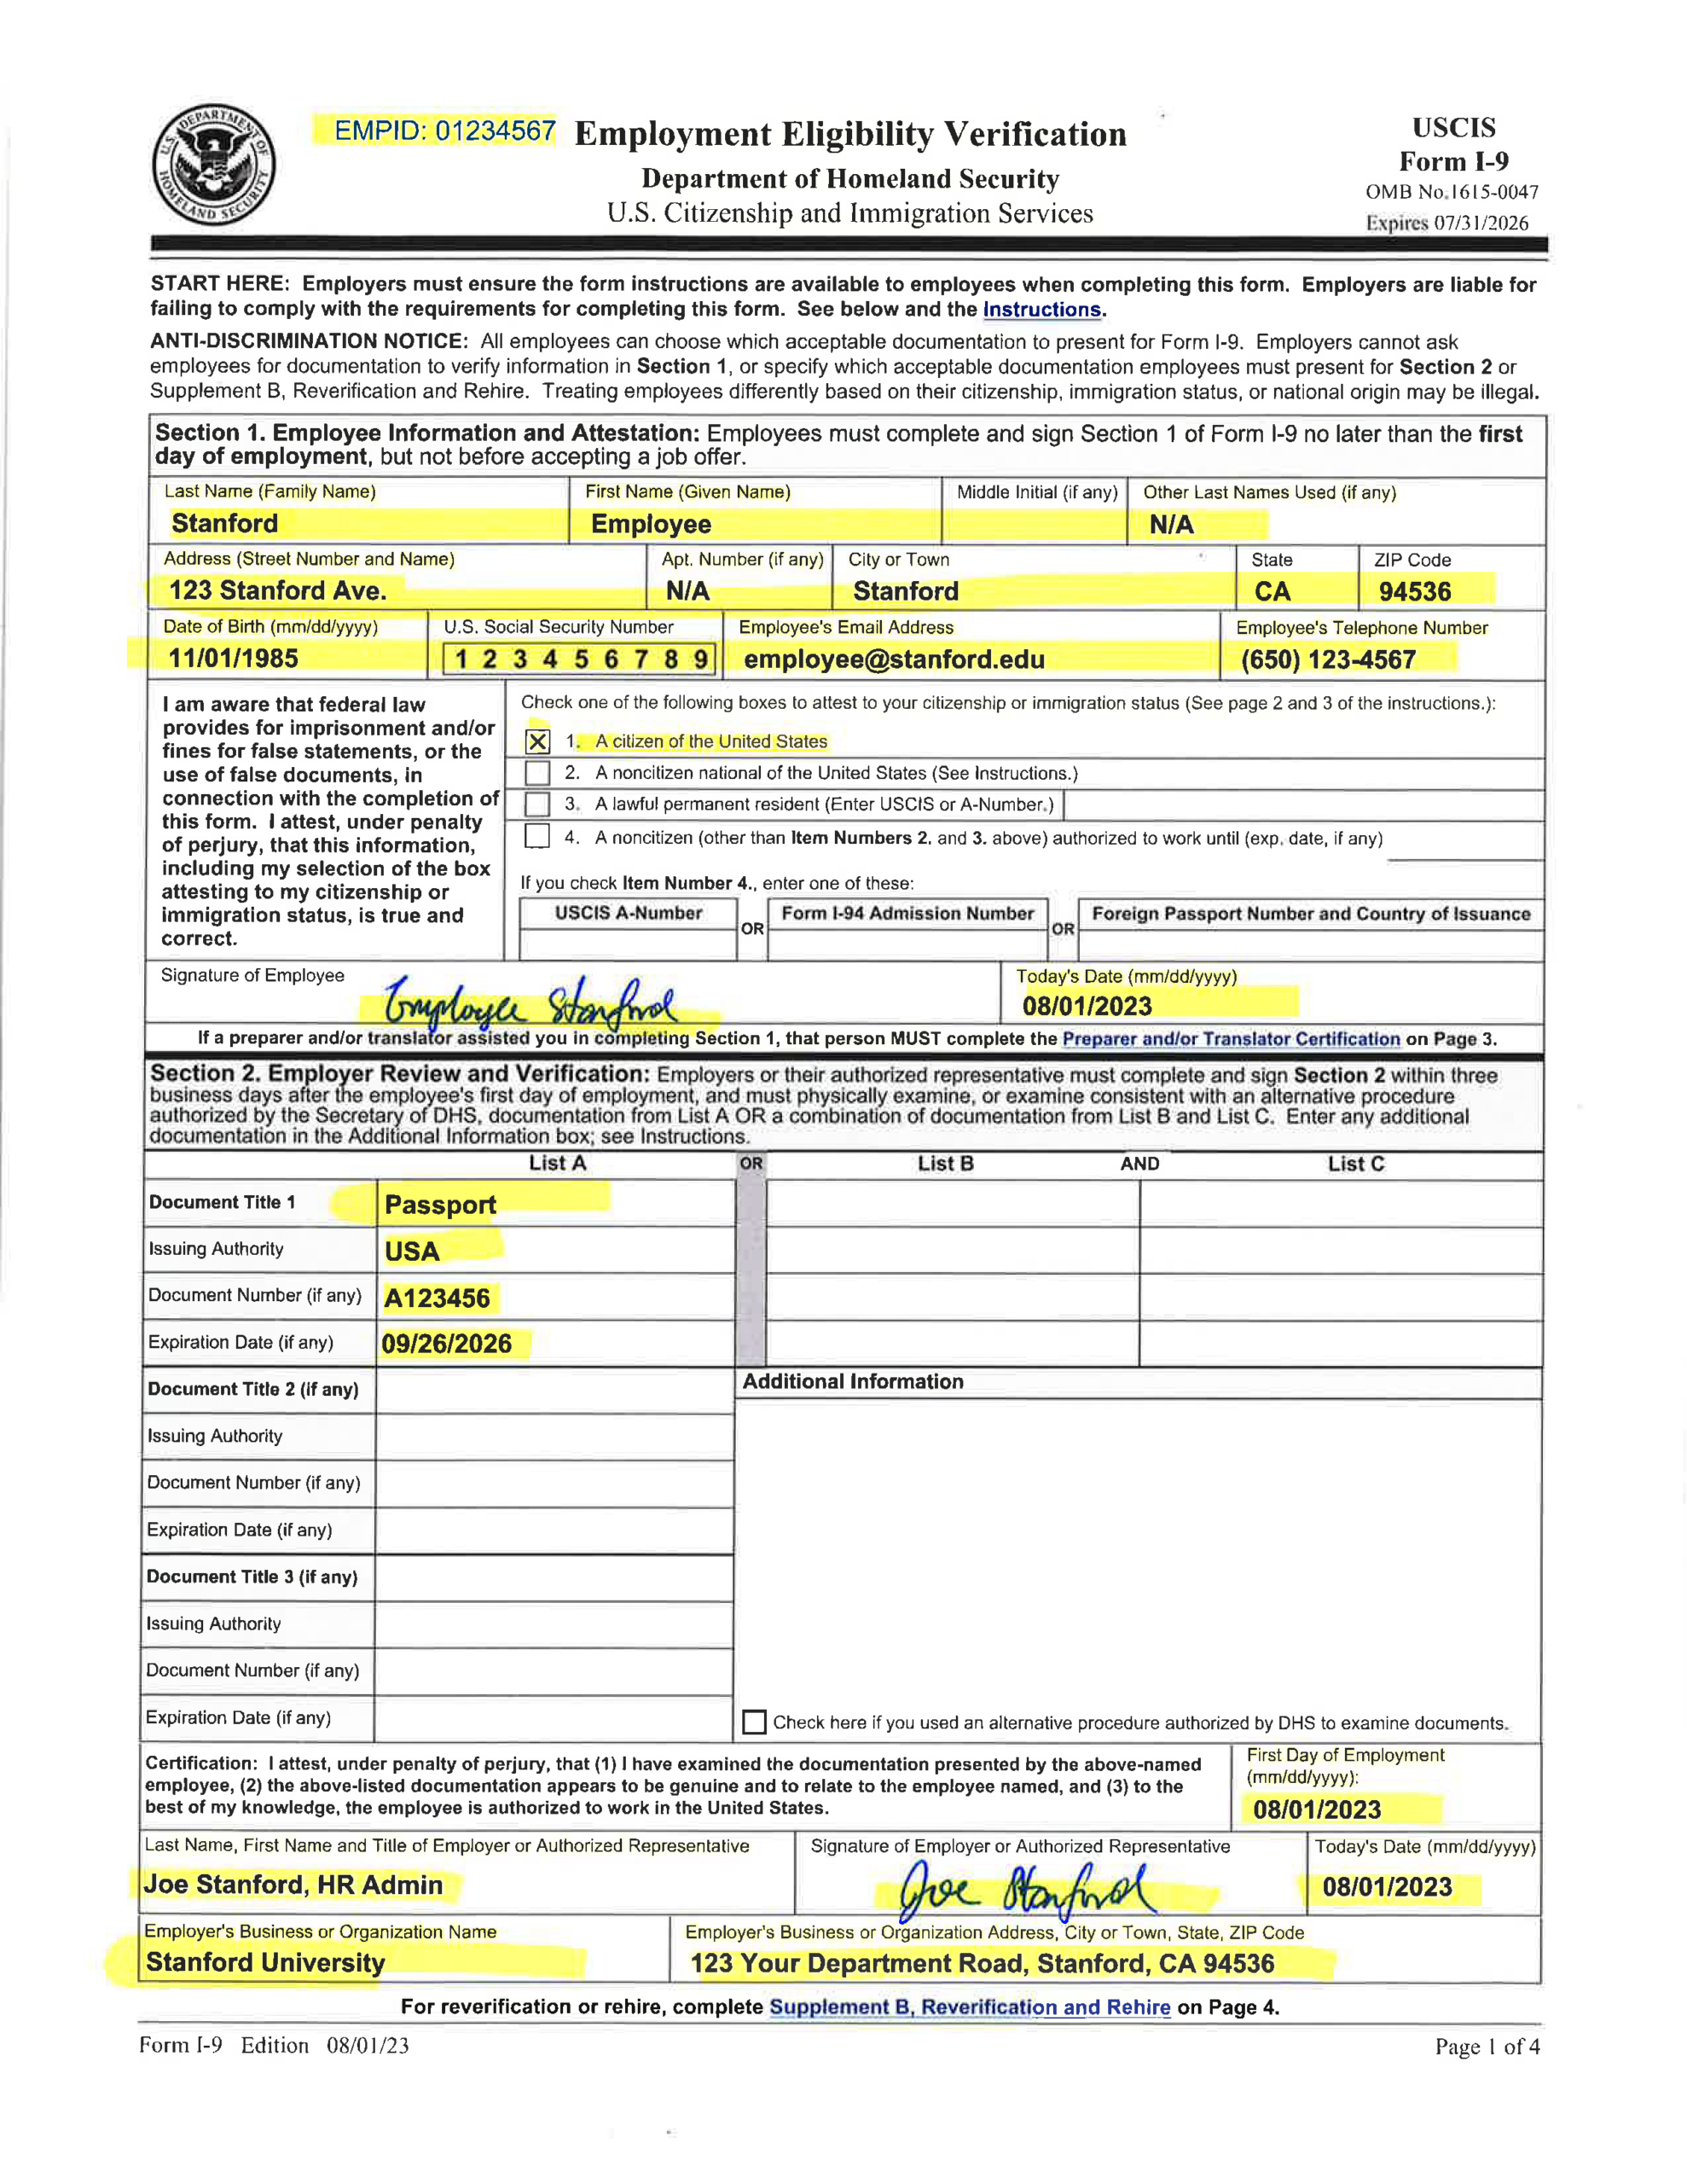 Examples Of Completed Form I-9 For Stanford throughout USCIS I9 Form Documents